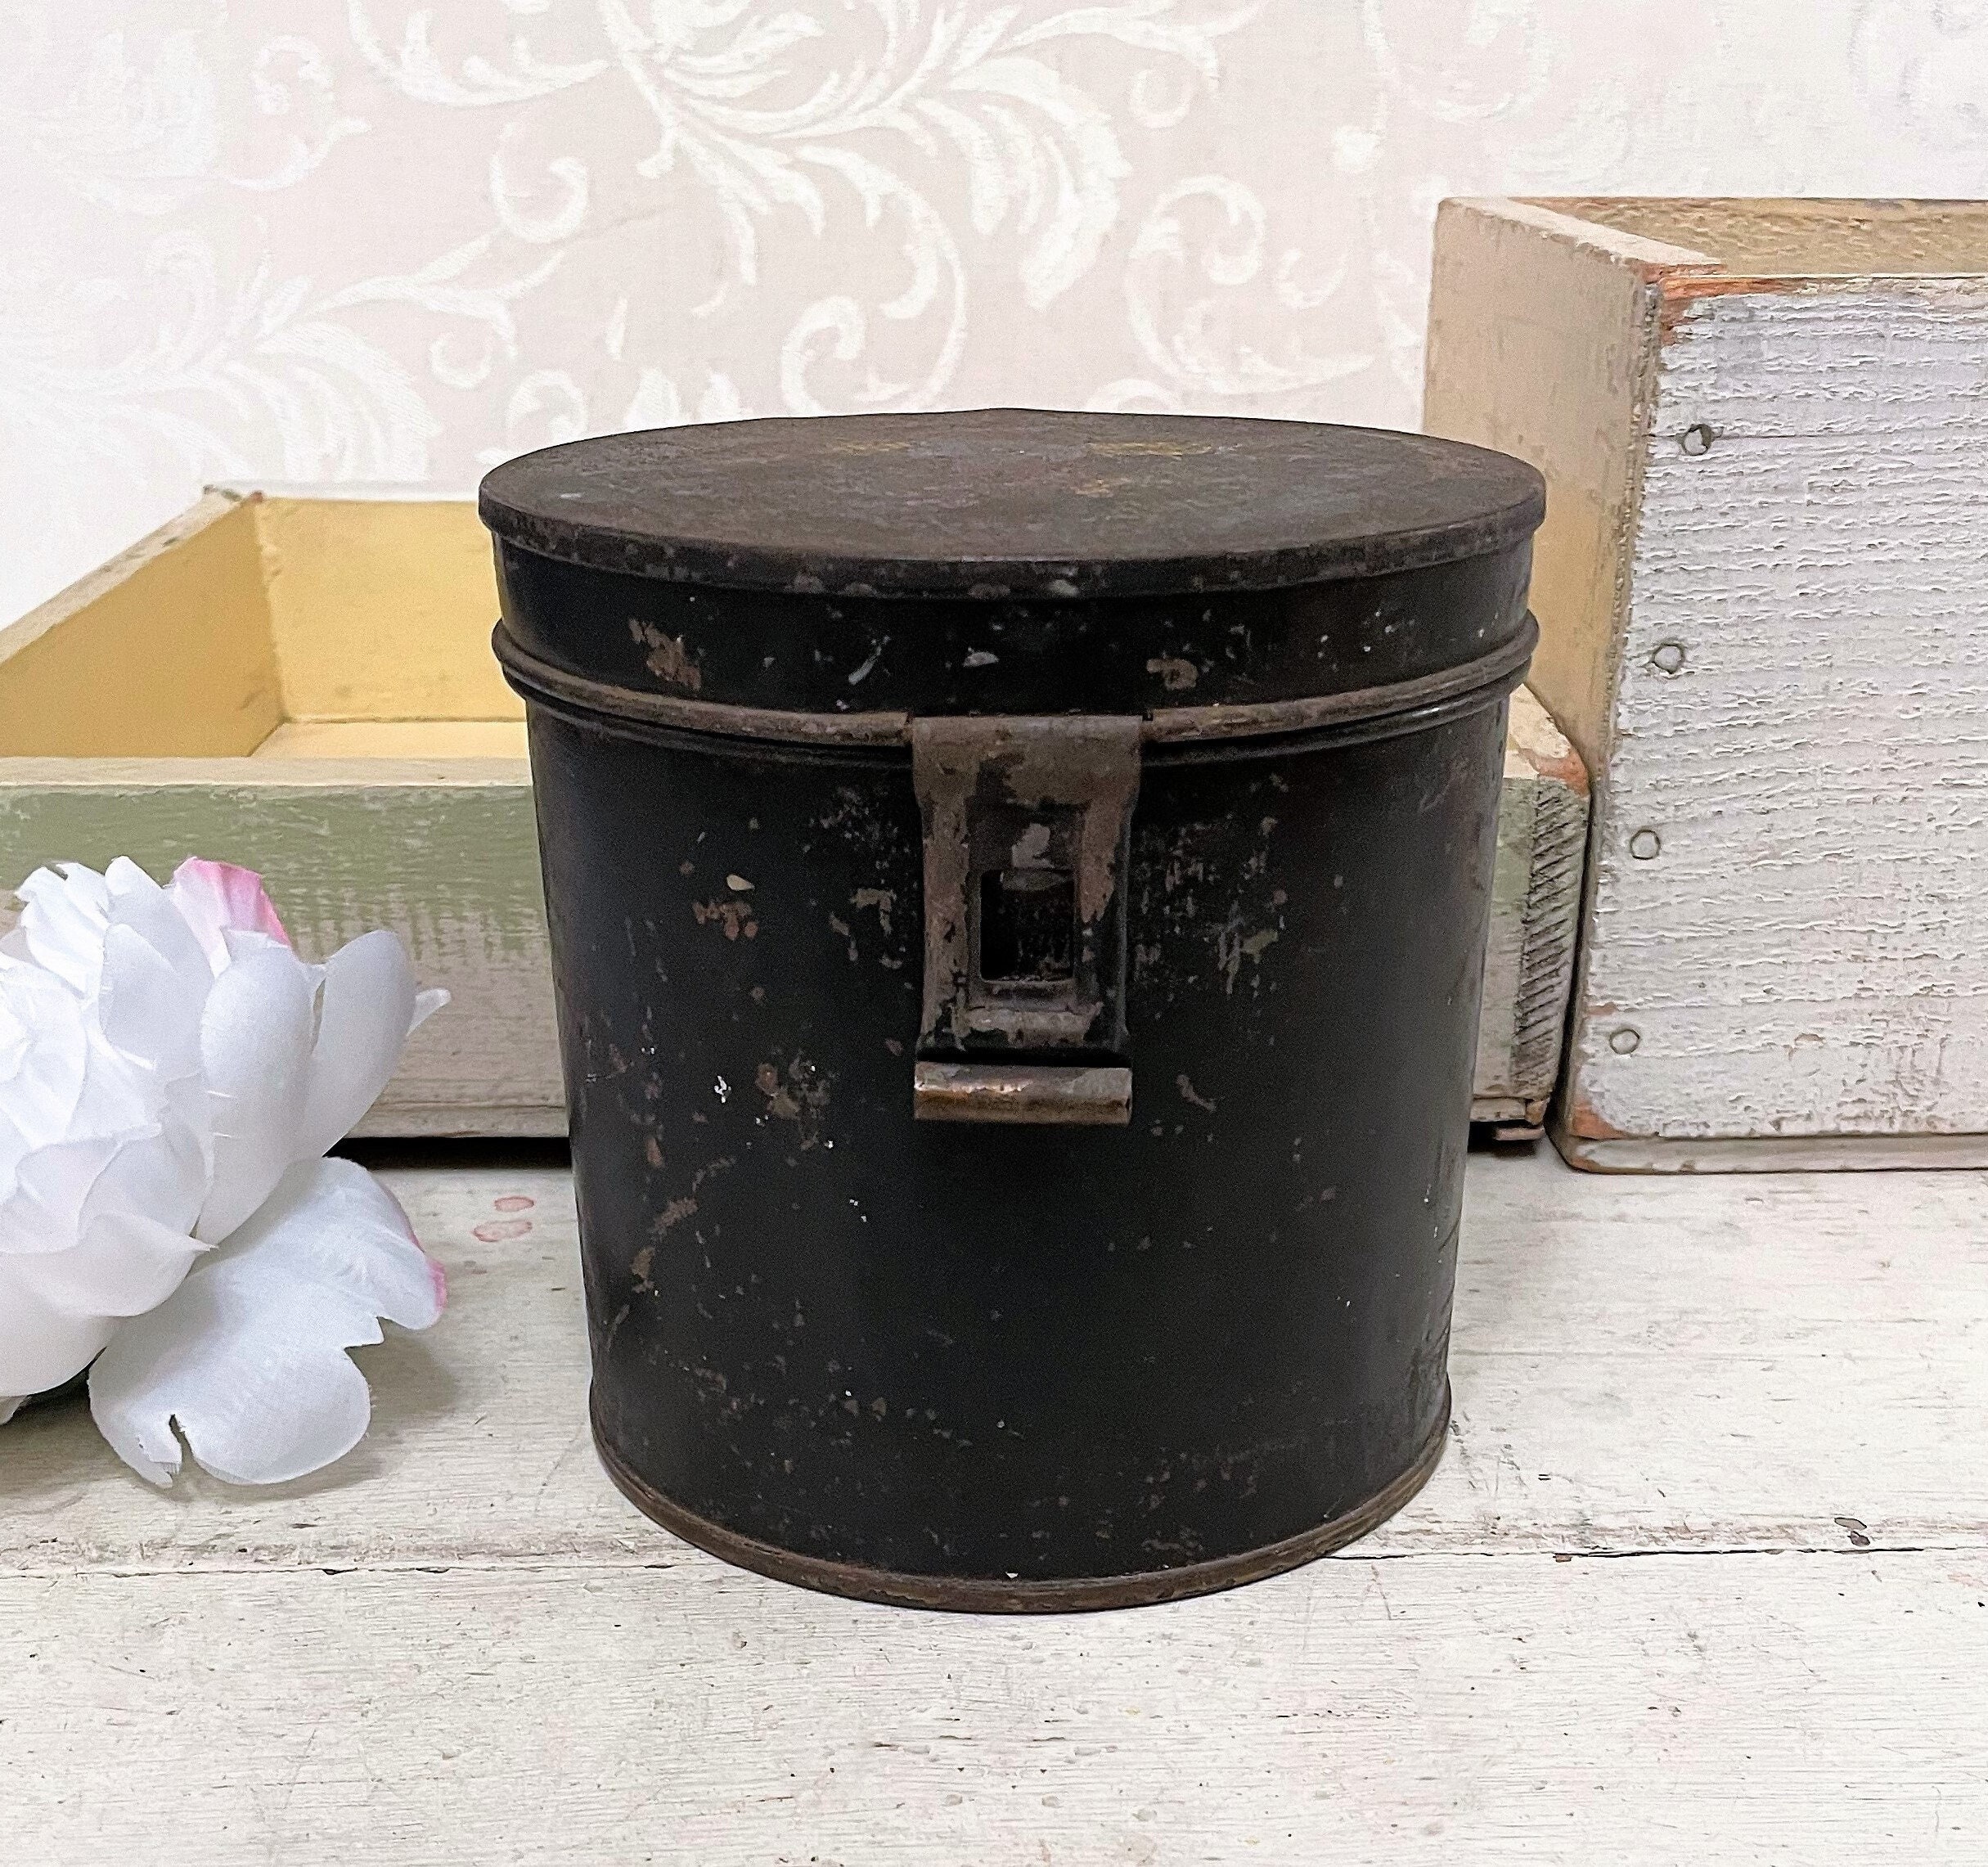 Antique Extra Large Cream City FLOUR Tin Storage Canister White & Gold  Farmhouse Country Store Container Chippy Rusty With Lid - The Junk Parlor